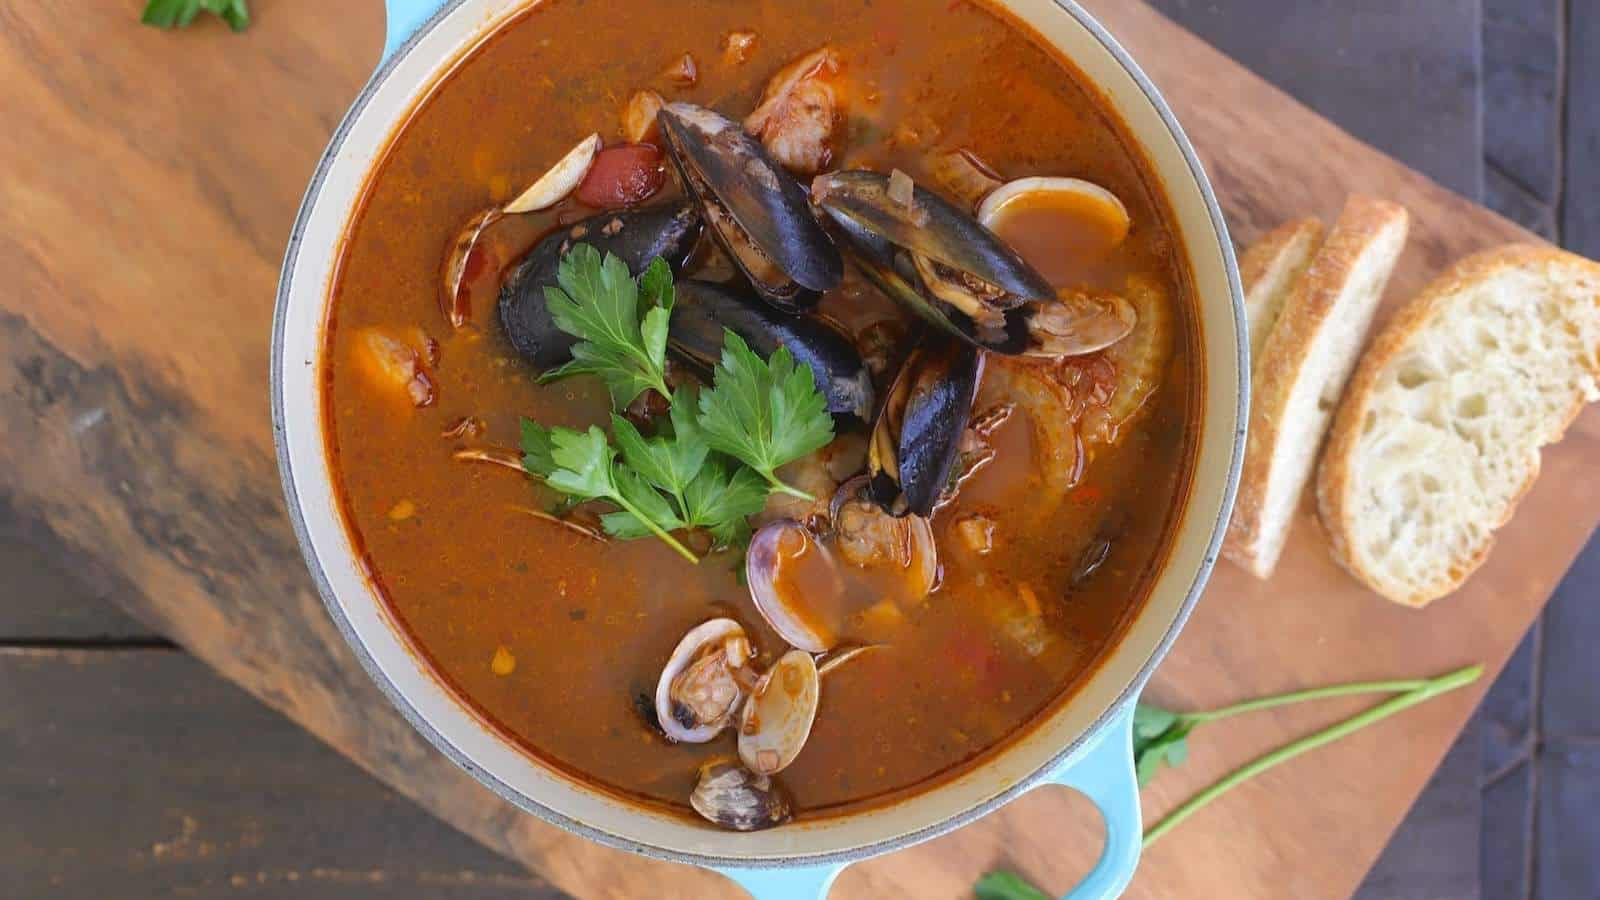 A bowl of seafood stew with visible clams, mussels, and chopped parsley, served with slices of bread on a wooden board.